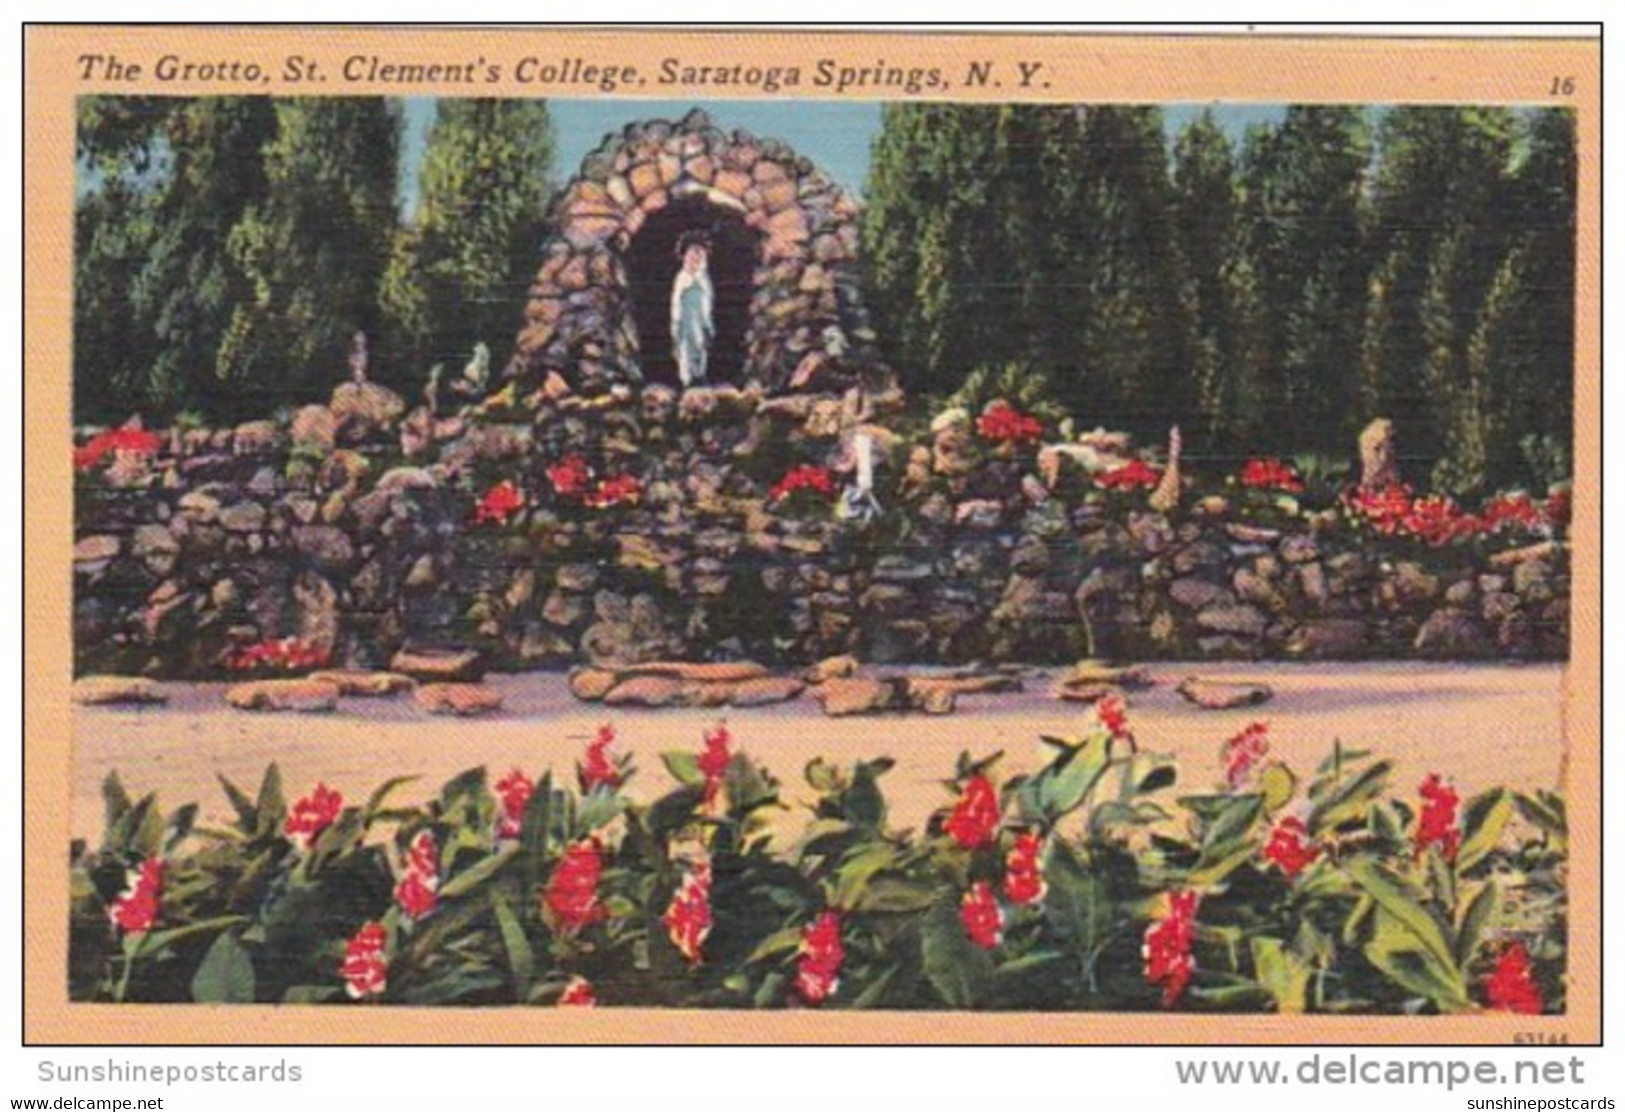 New York Saratoga Springs The Grotto St Clement's College - Saratoga Springs